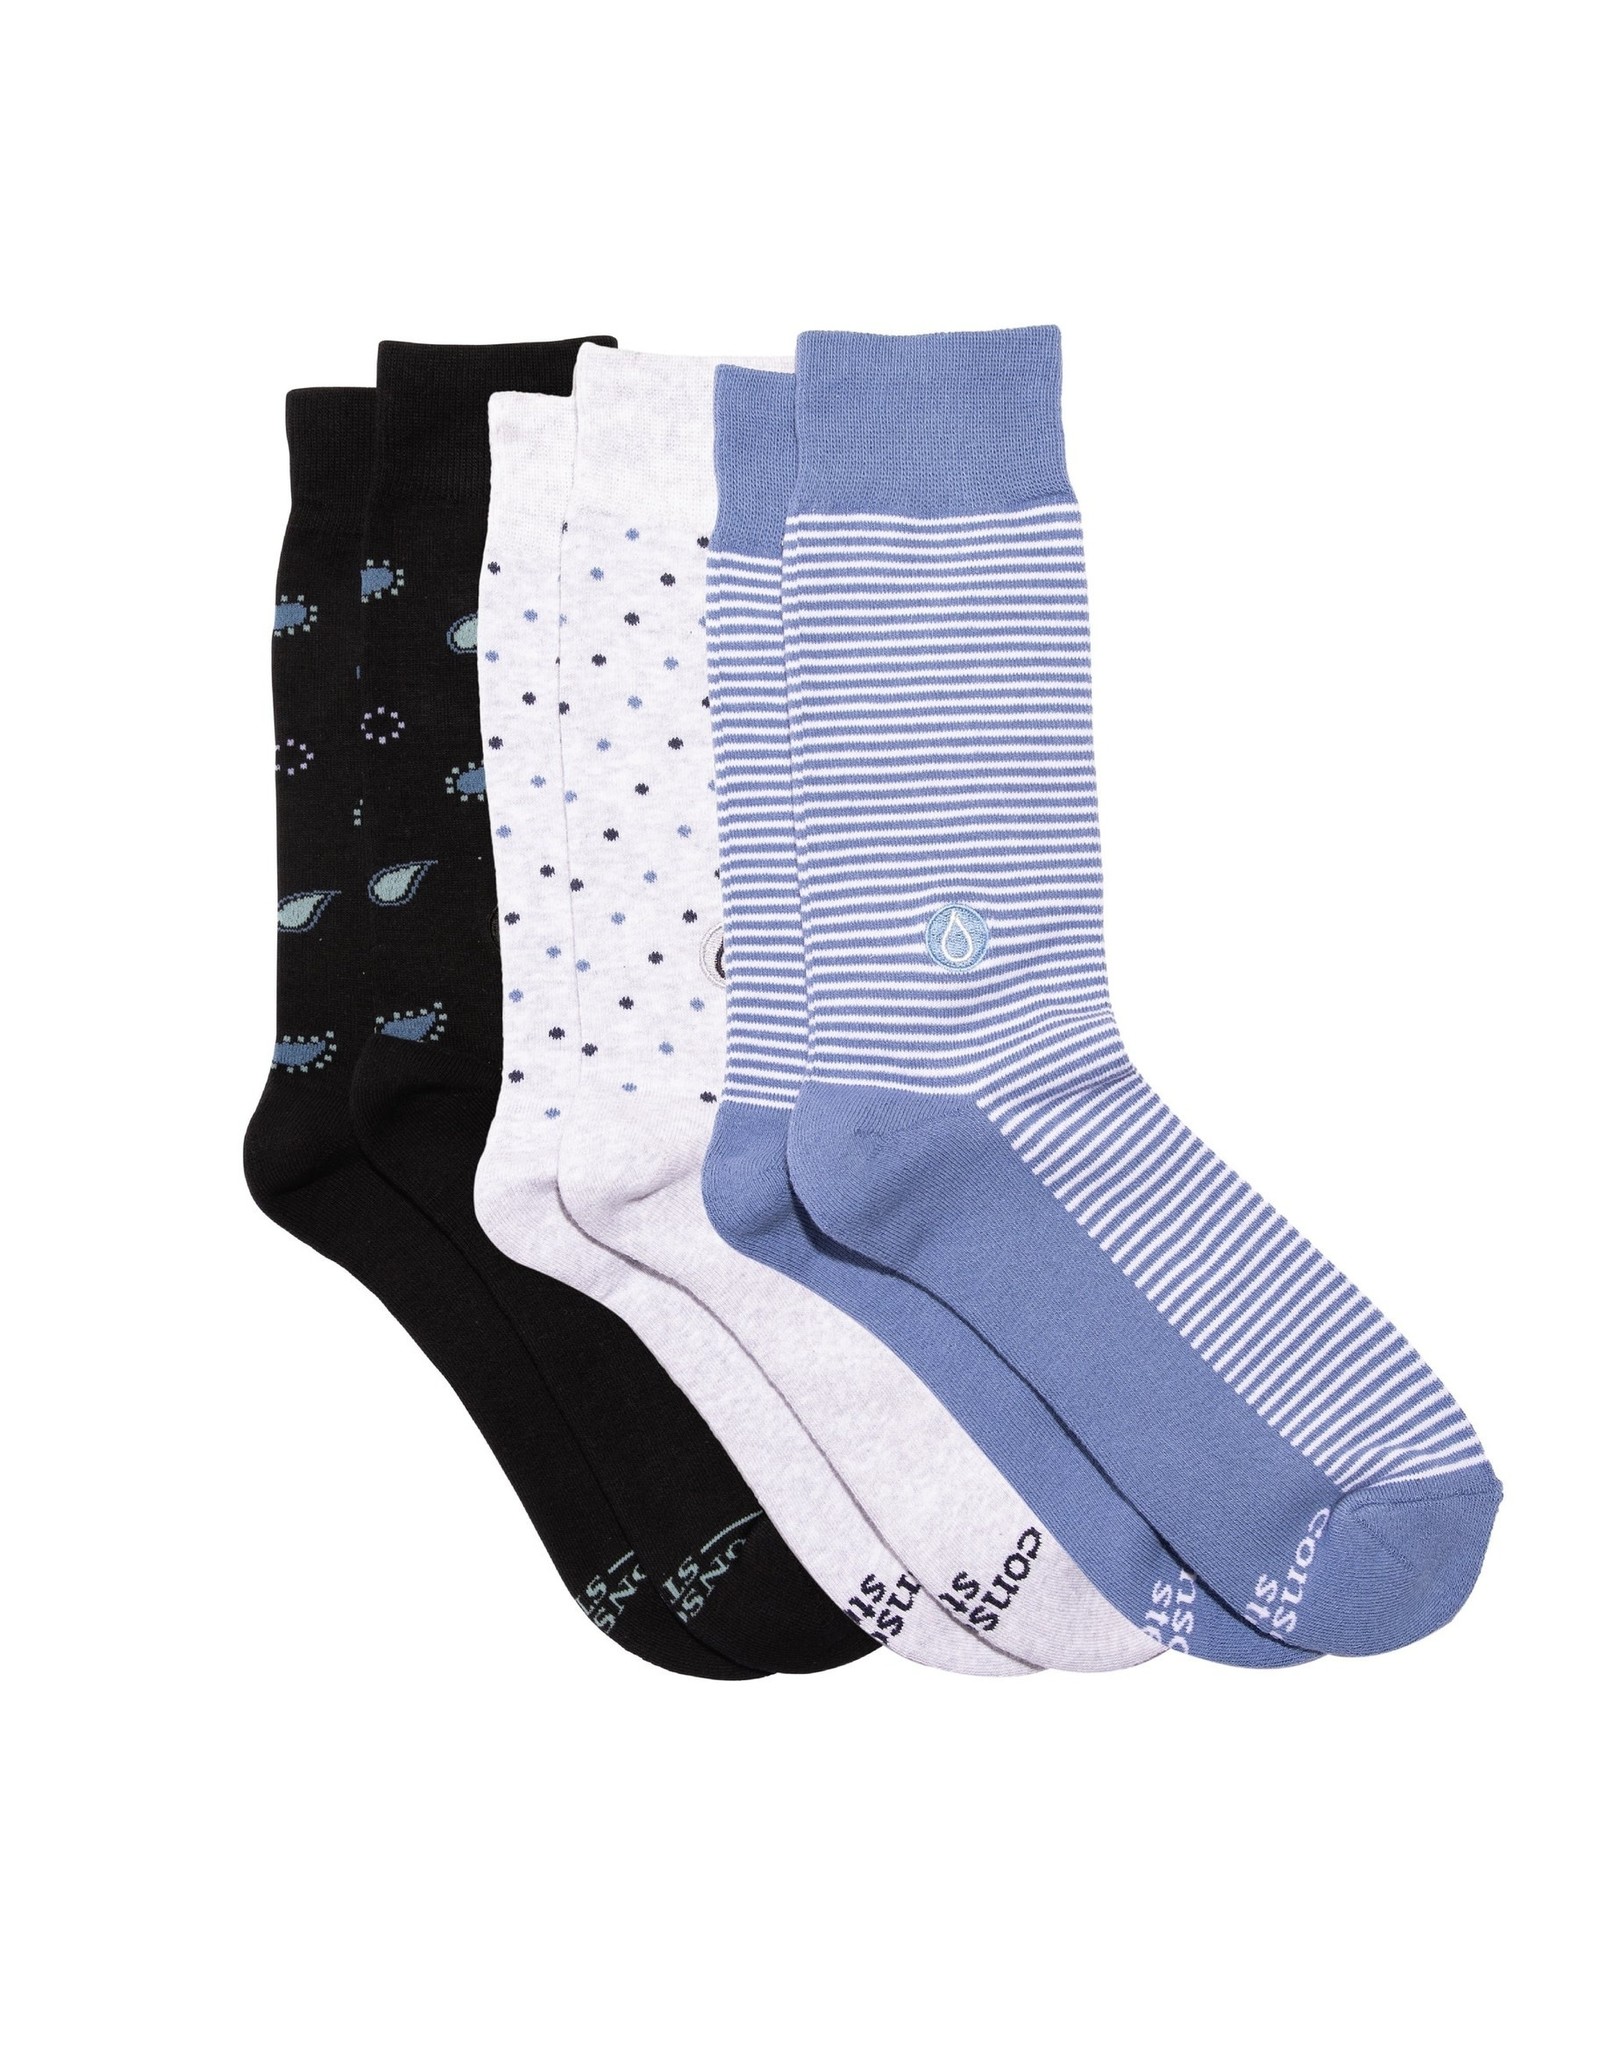 Boxed Set of Socks, the Give Water